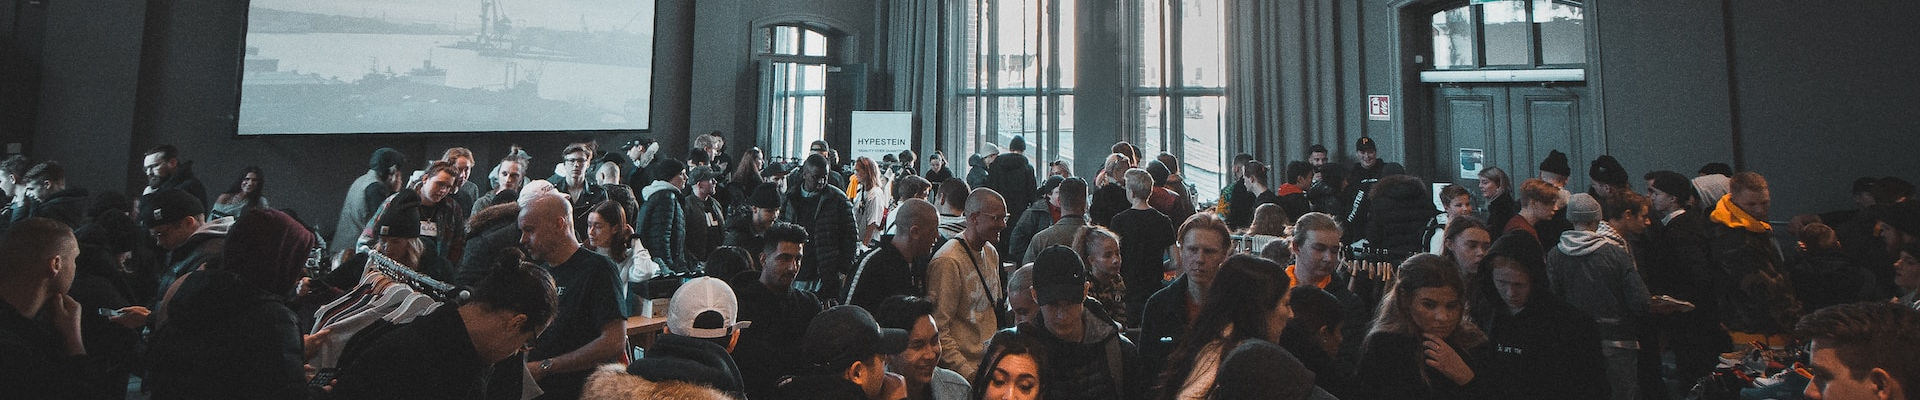 An image of a crowd of people at an event